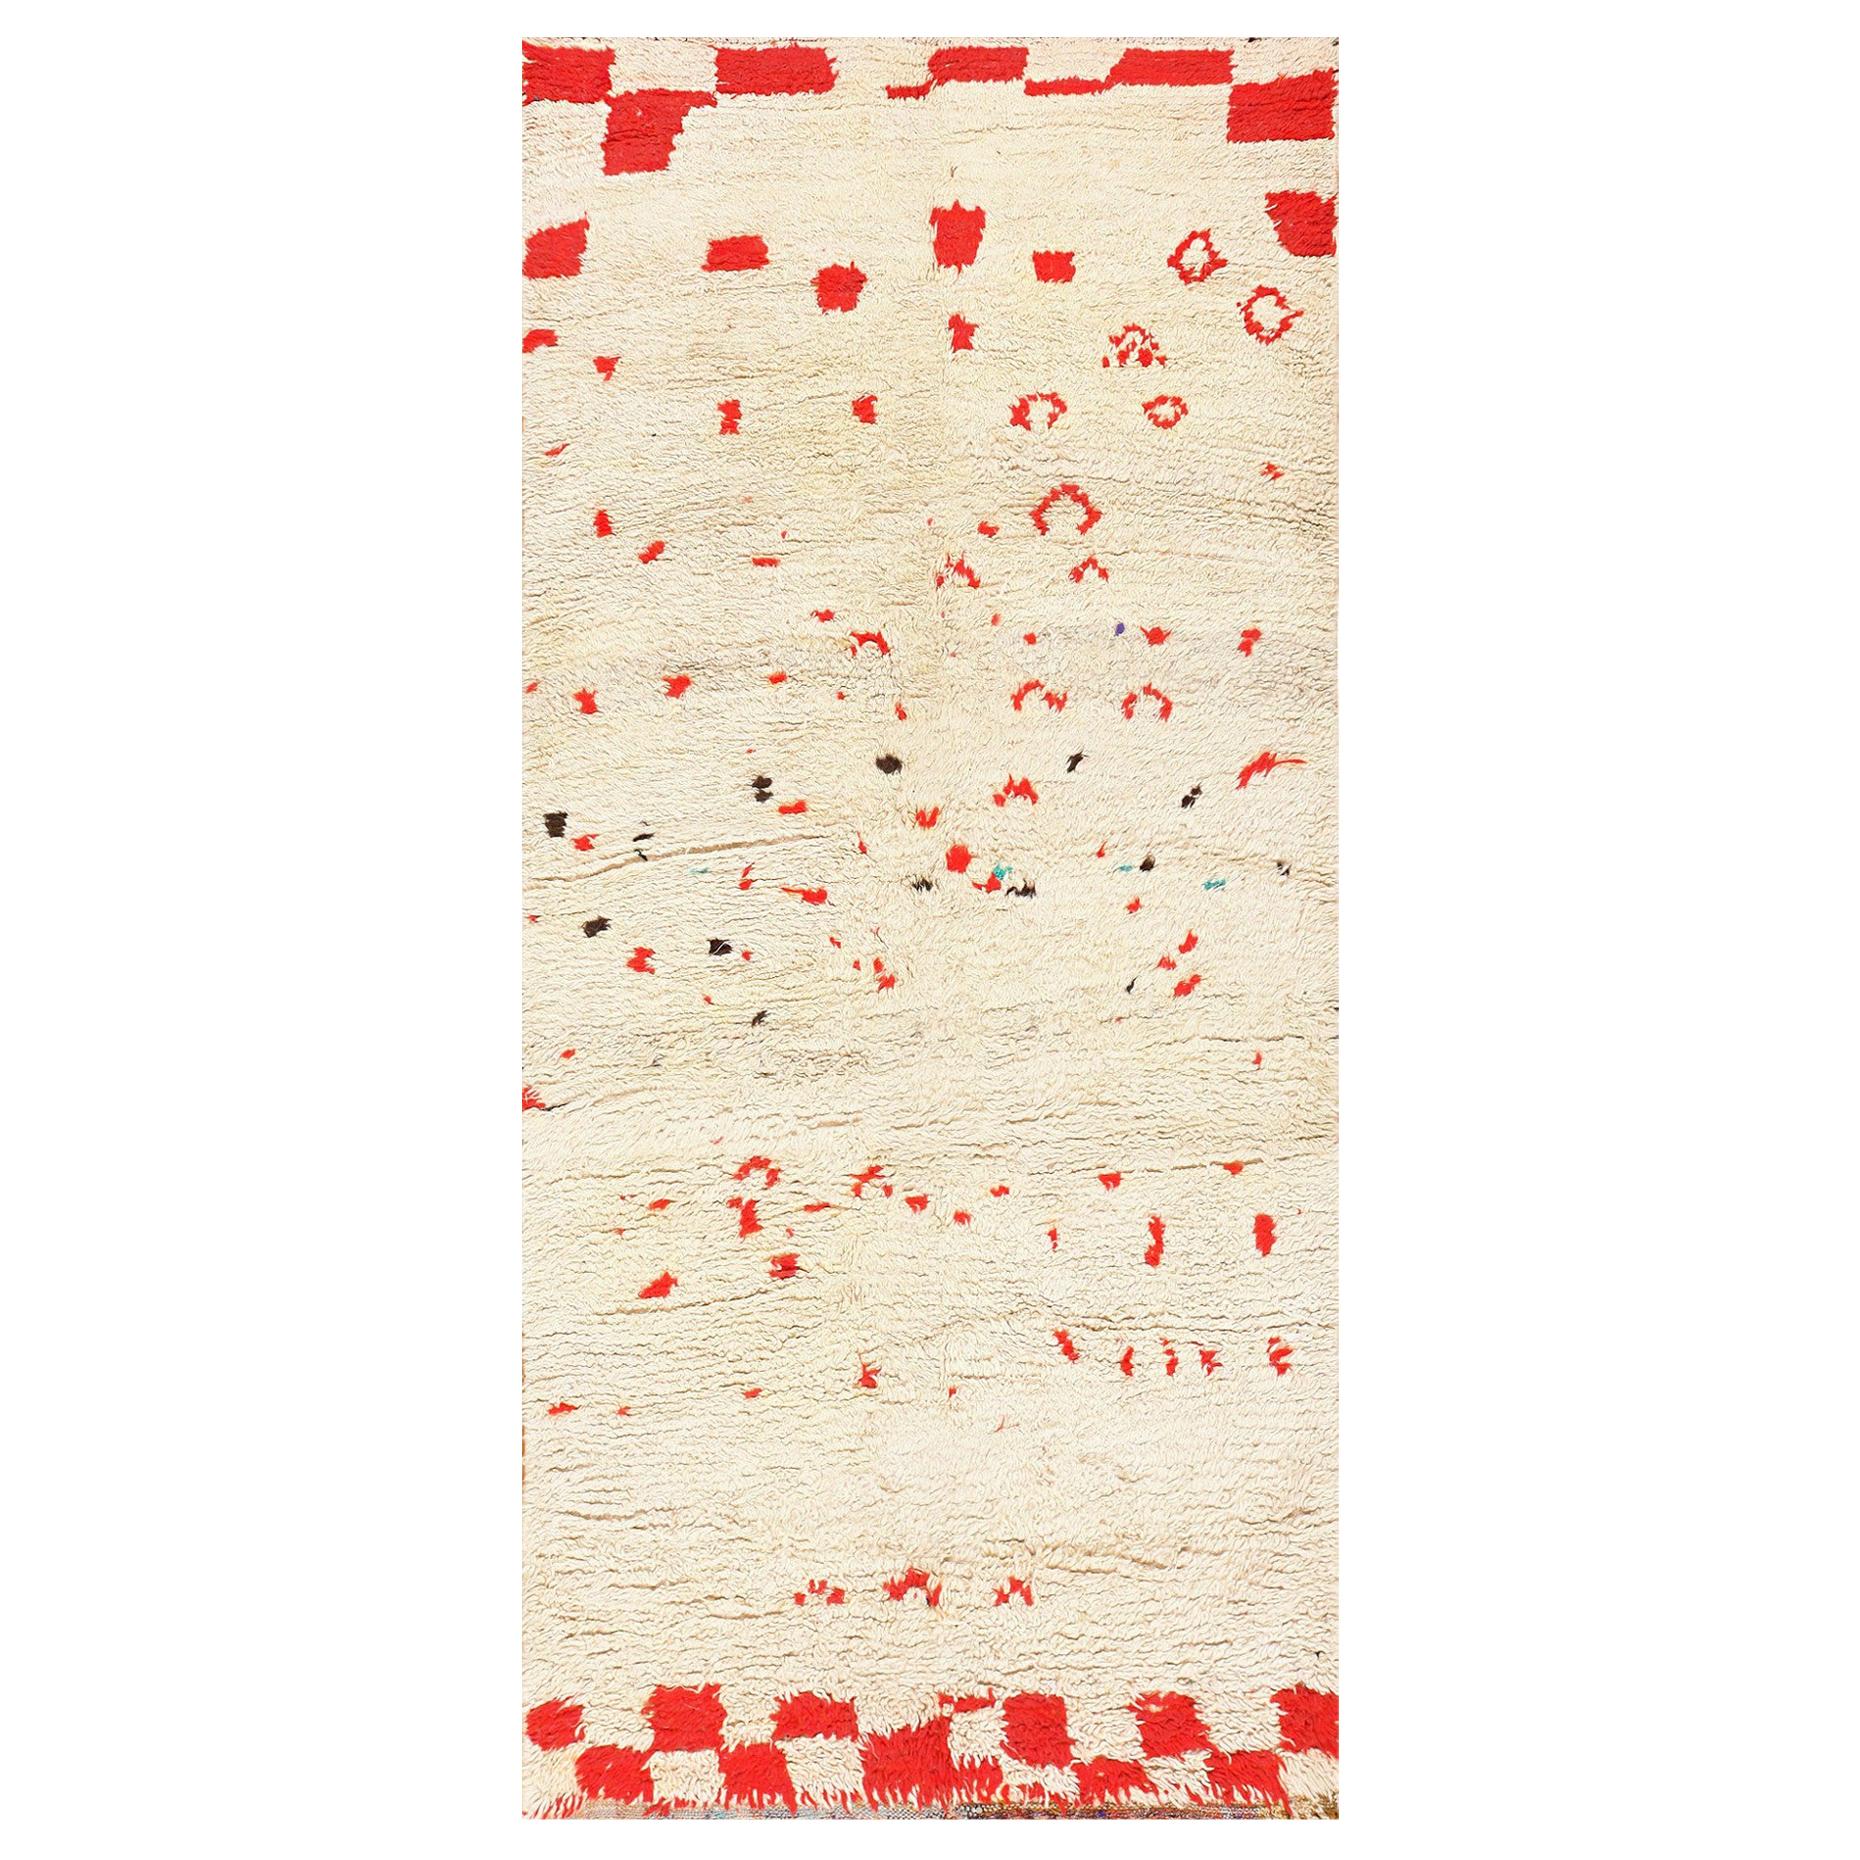 Ivory and Red Vintage Moroccan Rug. Size: 4 ft 7 in x 9 ft (1.4 m x 2.74 m)